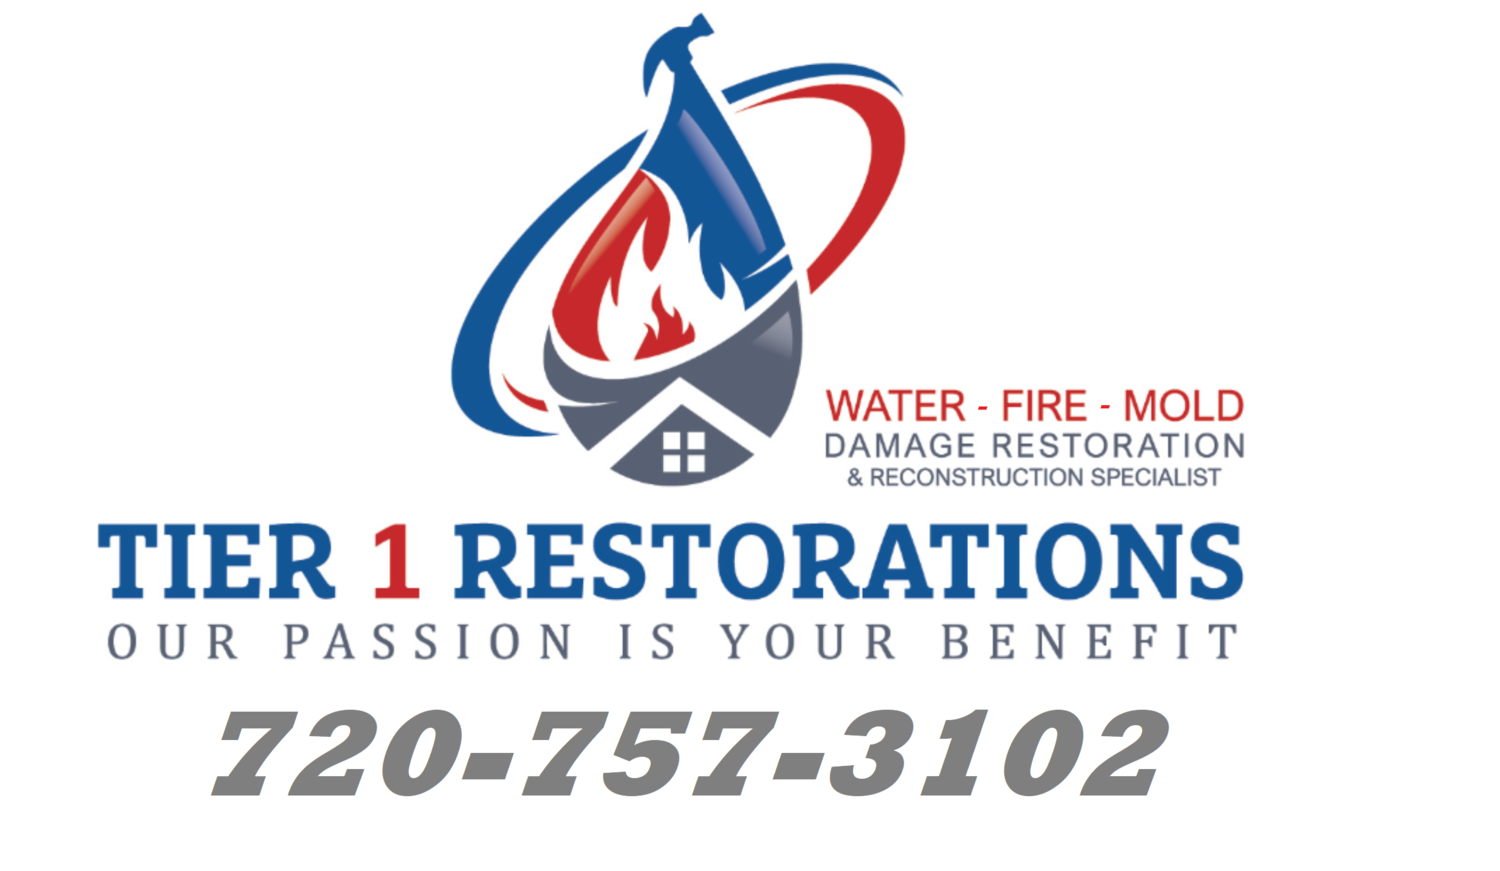 Water Damage Restoration & Mold Removal in the Greater Detroit, MI